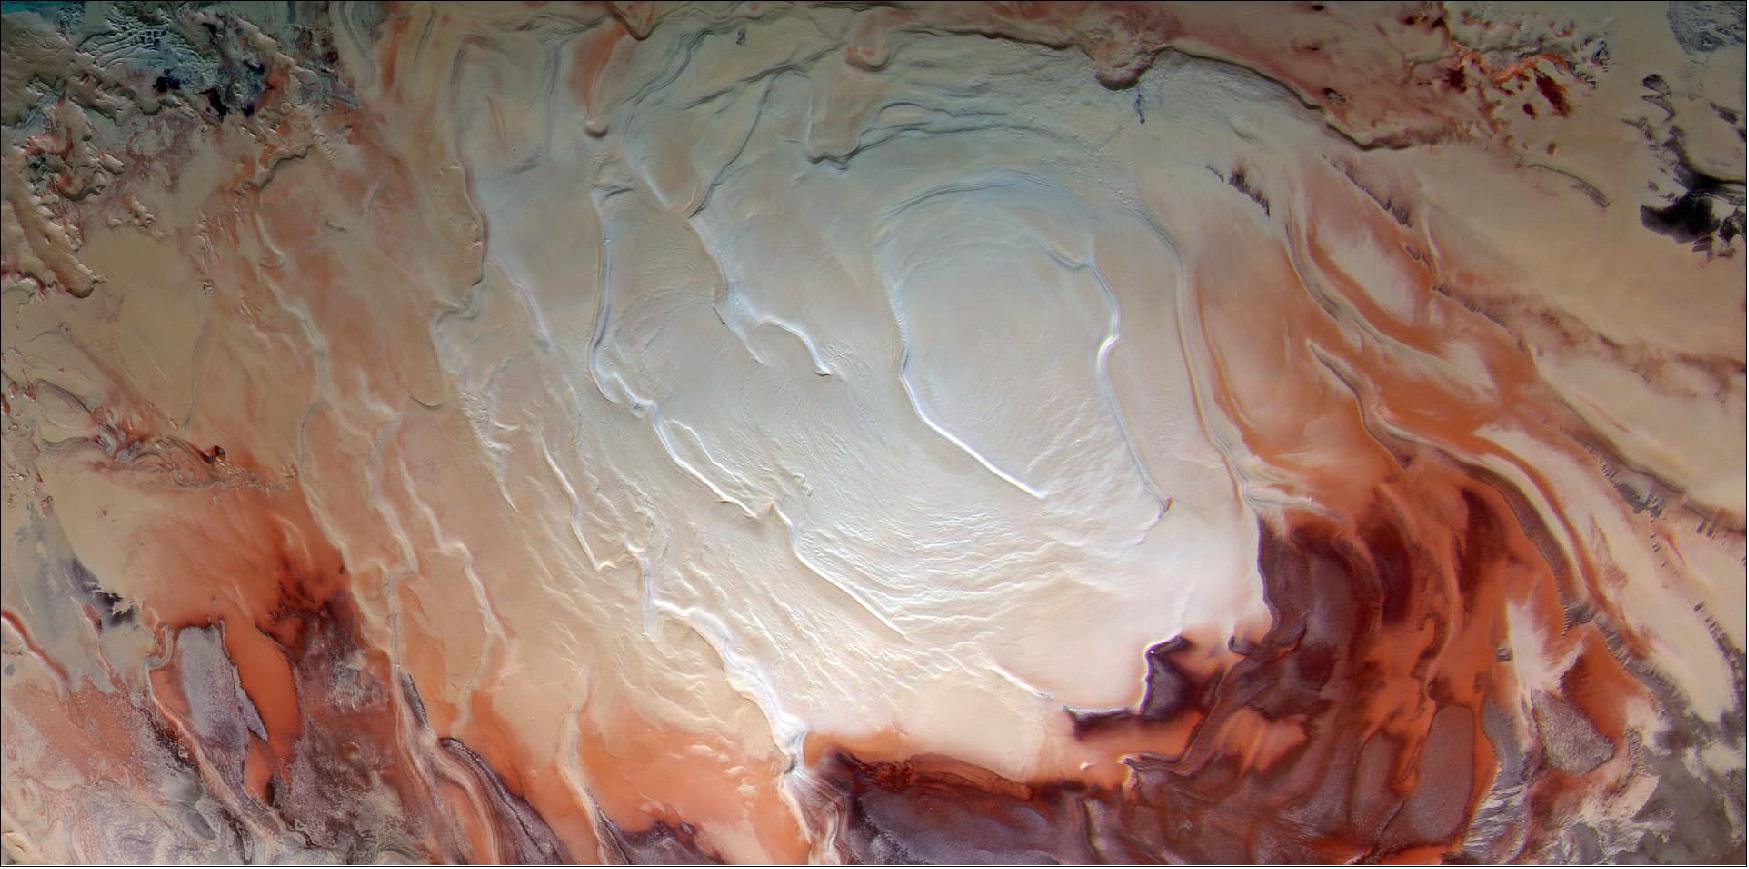 Figure 39: The southern polar ice cap on Mars at the beginning of spring observed by HRSC on Mars Express (image credit: ESA/DLR/FU Berlin, CC BY-SA 3.0 IGO)